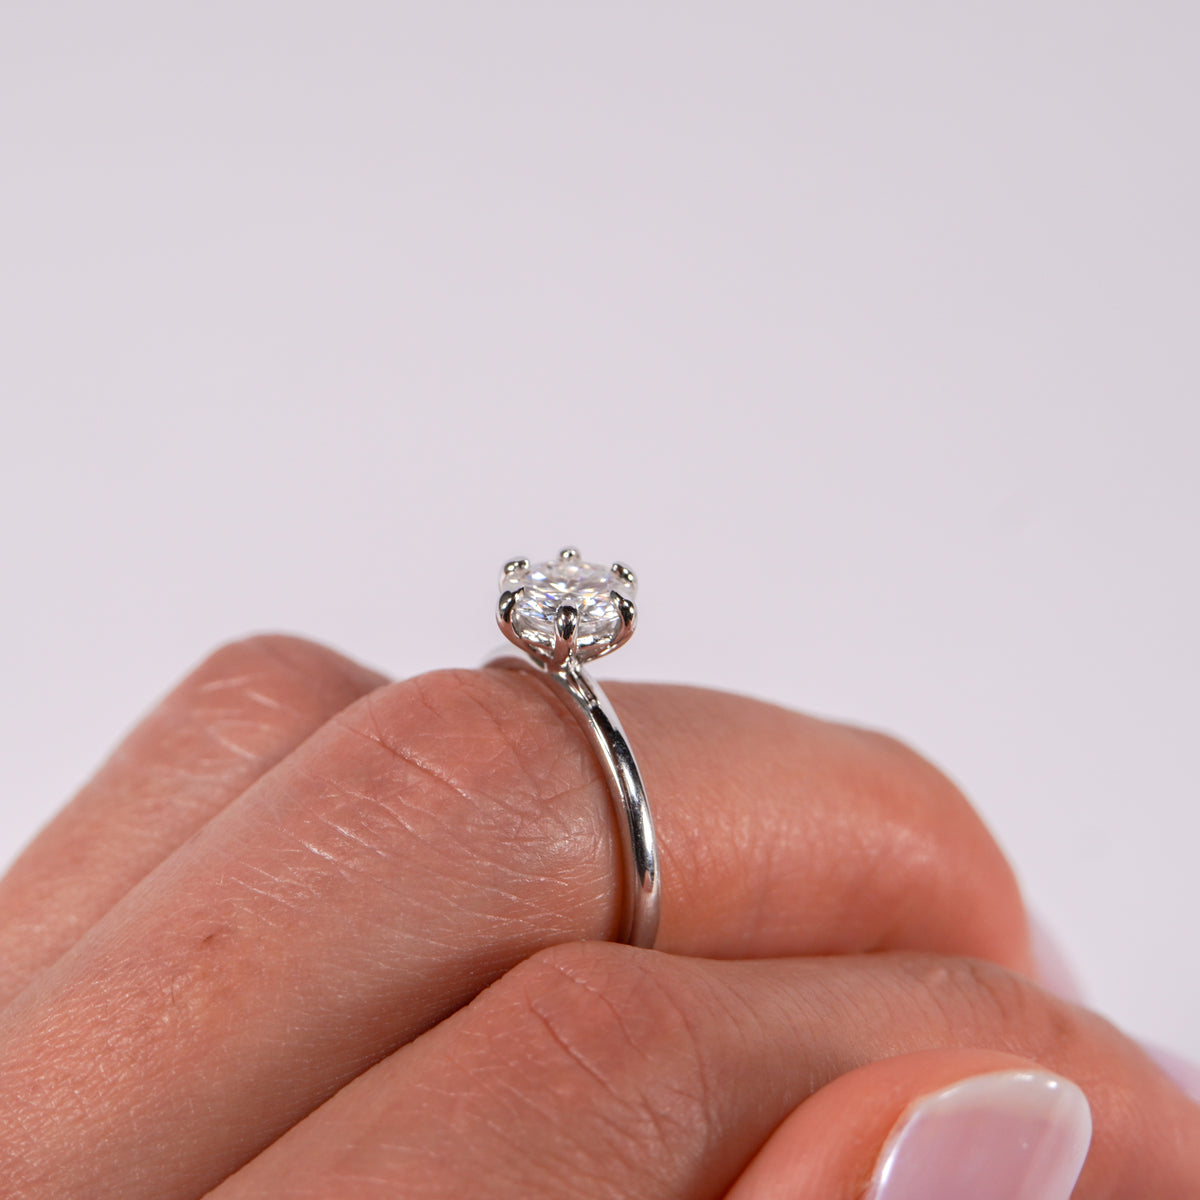 Serena - 6 Claw Round Solitaire Ring